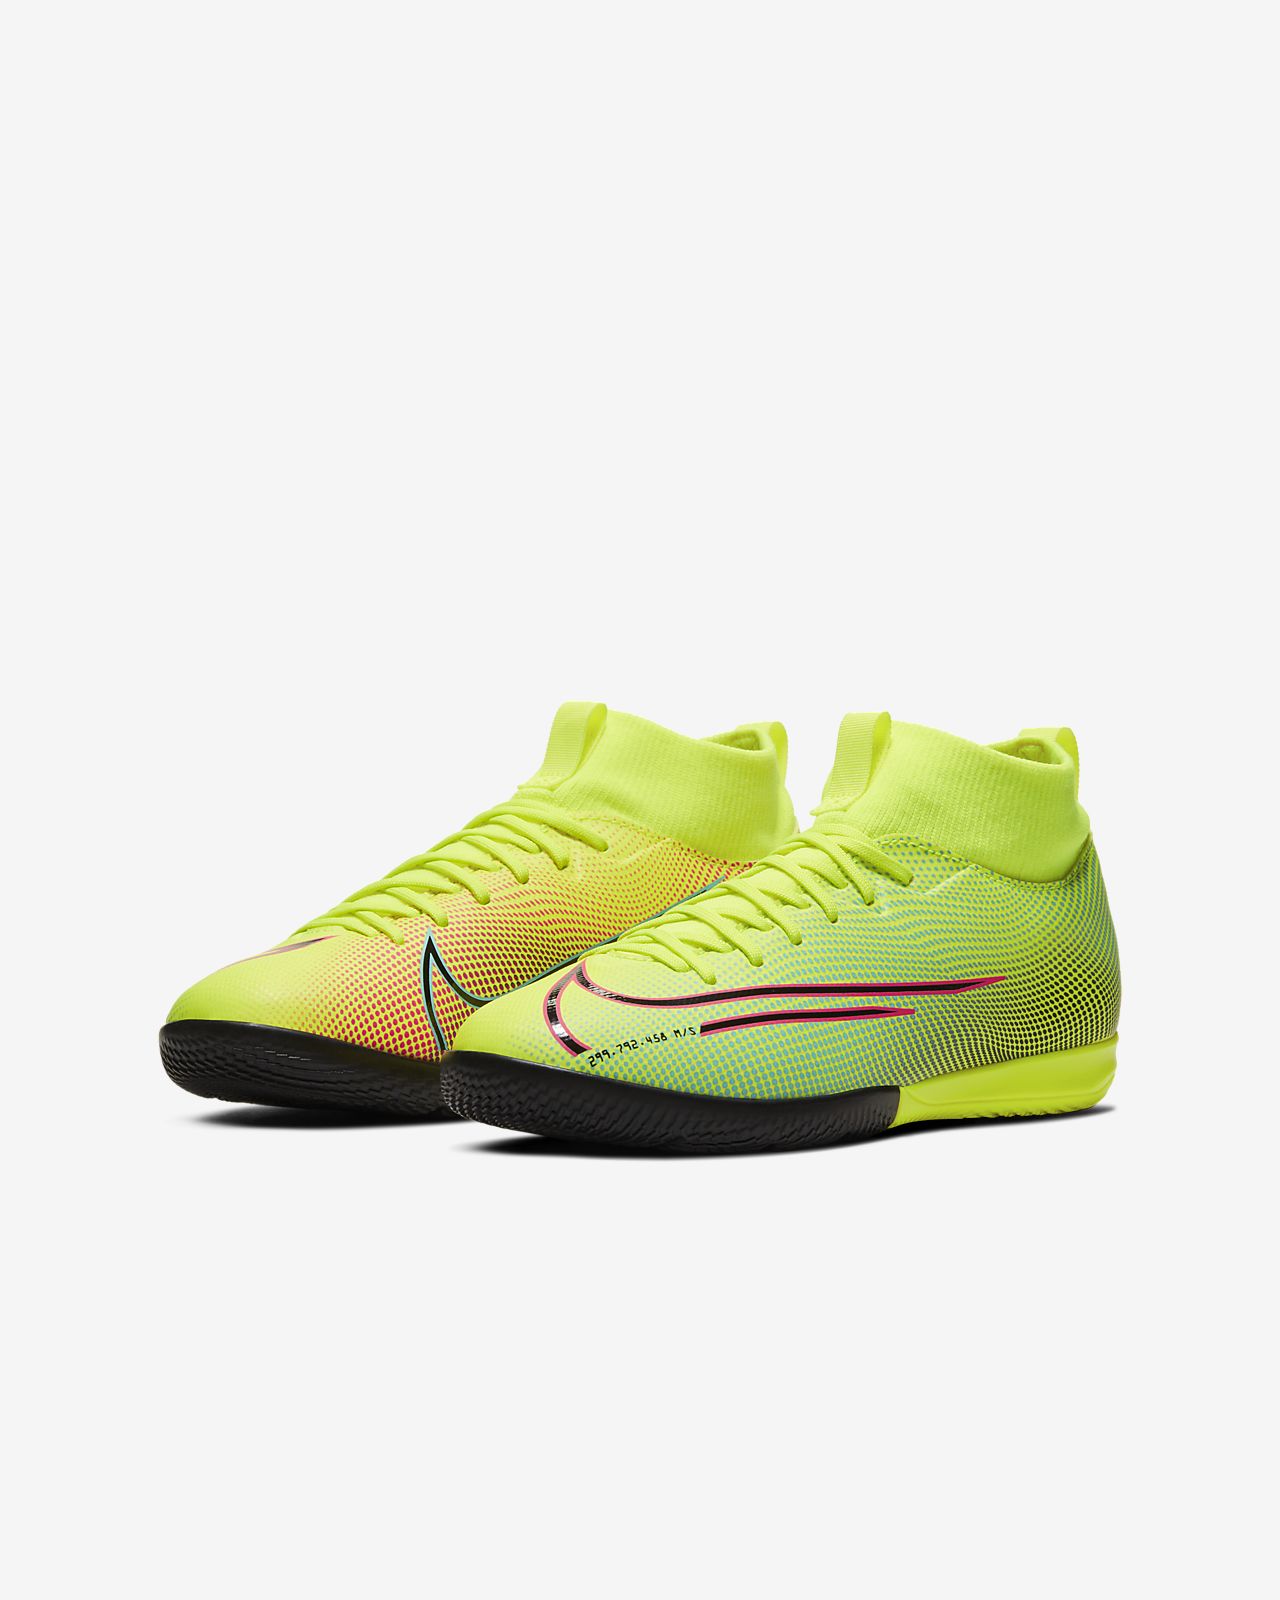 Nike Mercurial Superfly 6 Academy Boots Nike Shoes